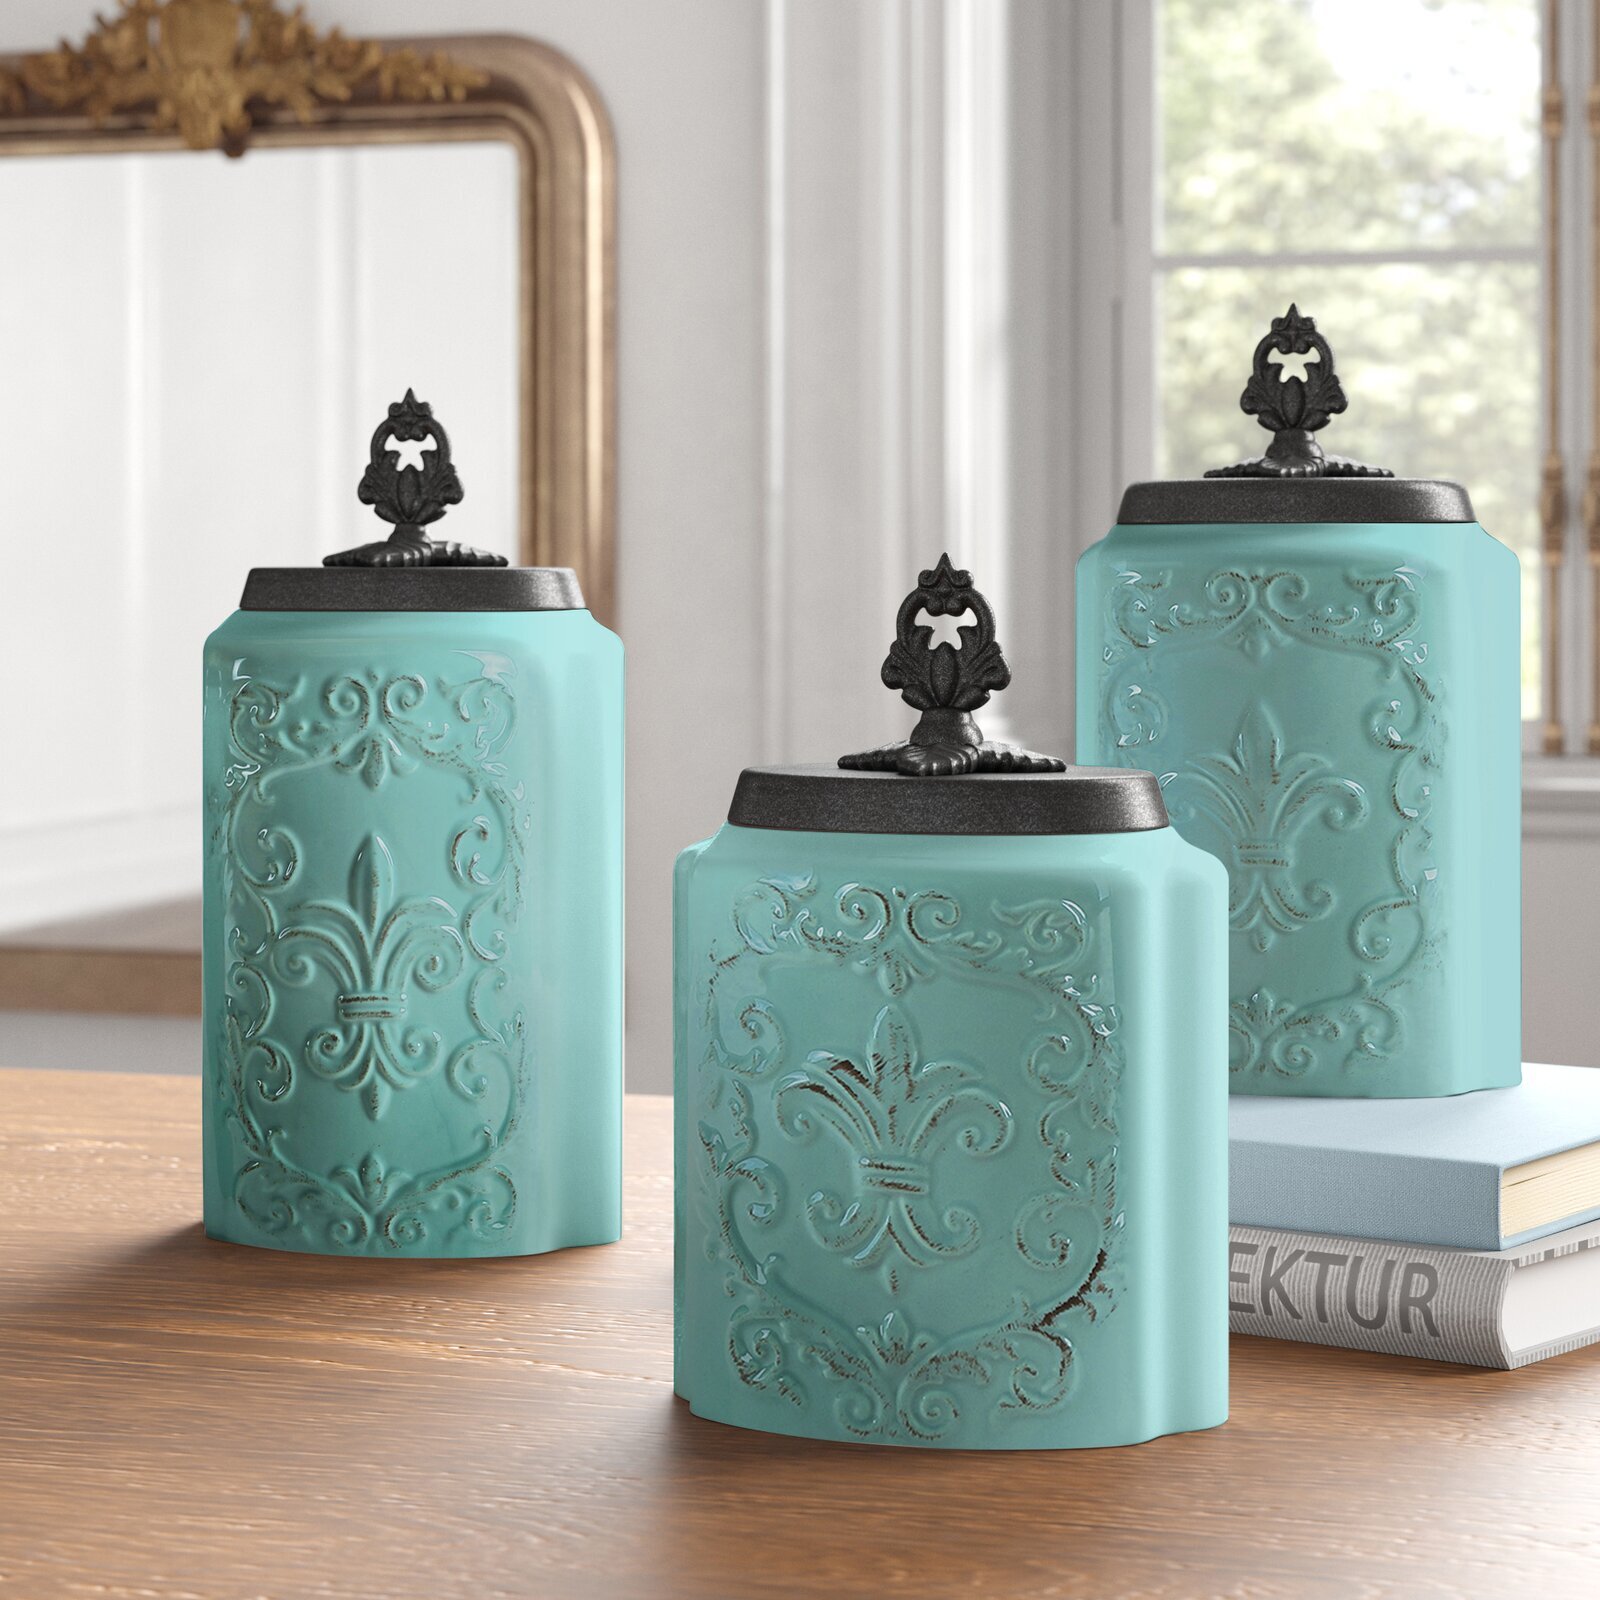 Ornate country canister set